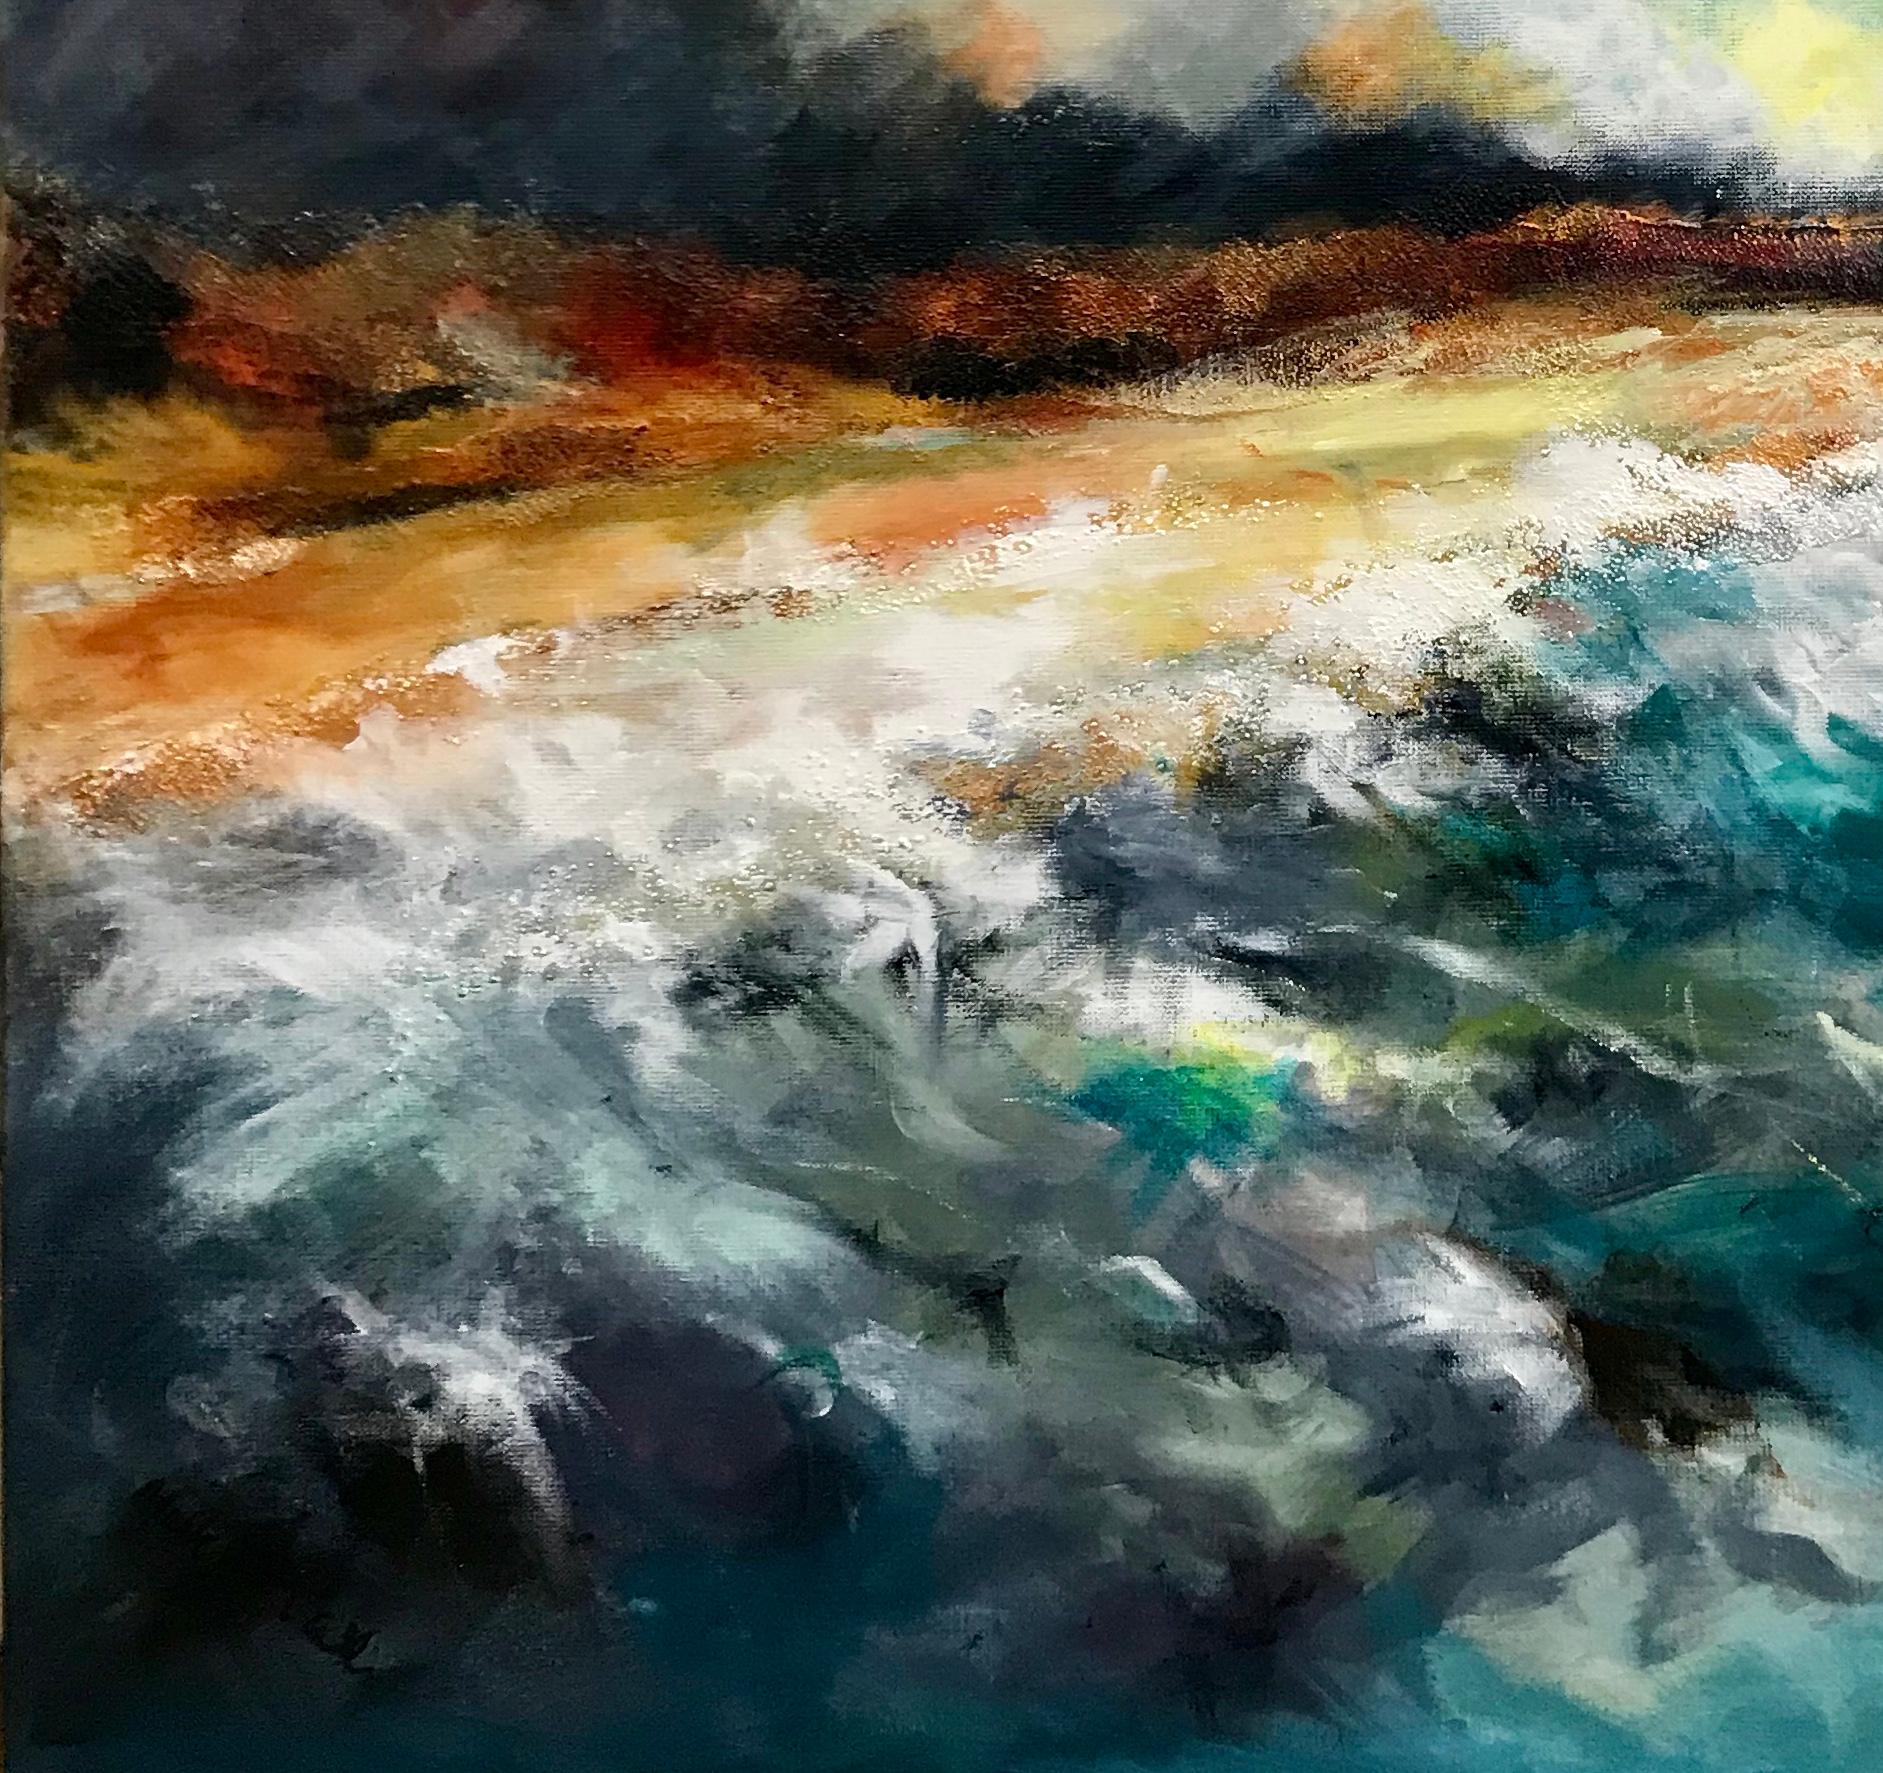 91 x 91cm - image size
96 x 96cm - frame size

Contemporary seascape painting by Mark MacCallum.

Mark McCallum was born in North Yorkshire in 1964 and he studied at St Johns in York where he graduated in 1988 with a BA Honors degree in Fine Art and